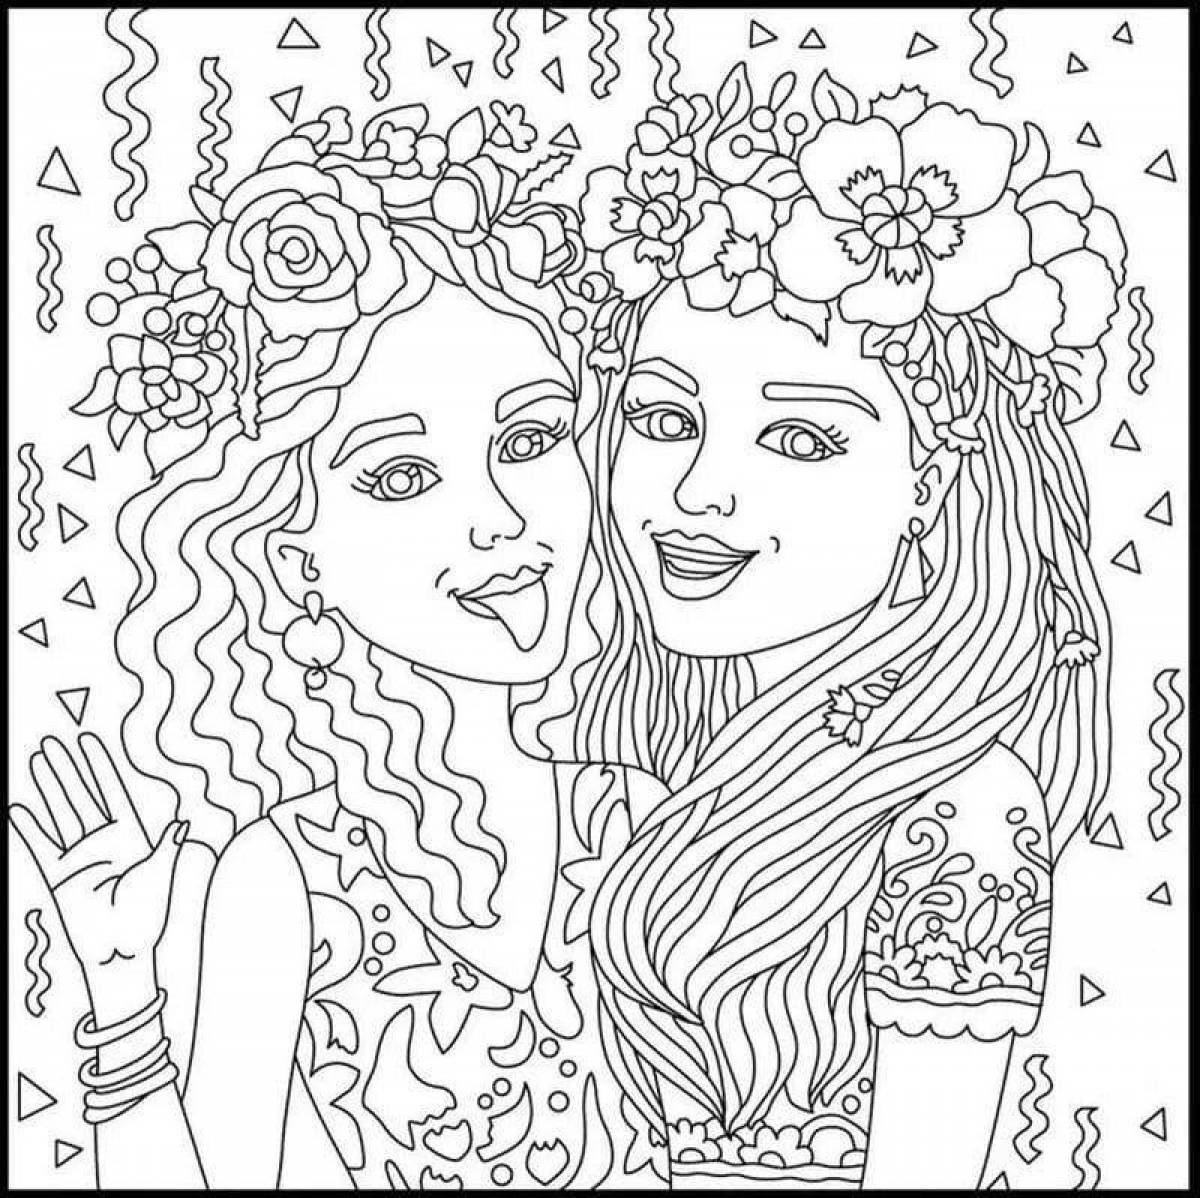 Creative coloring book for 20 year old girls